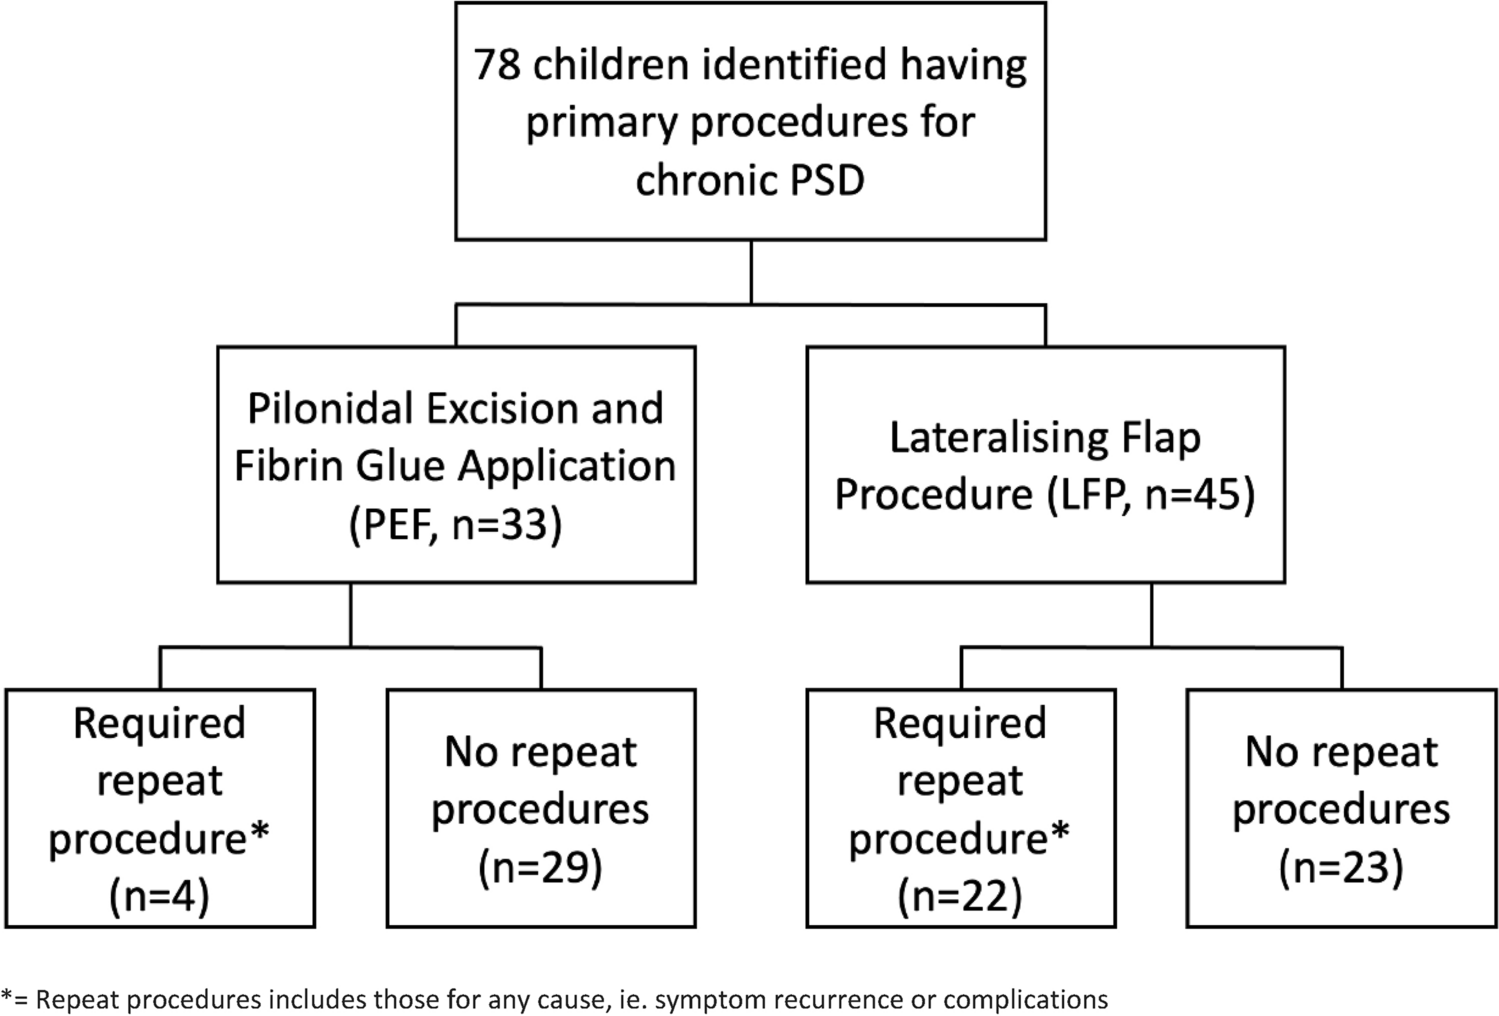 Pit excision with fibrin glue closure versus lateralizing flap procedures in the management of pilonidal sinus disease in adolescents: a 14-year cohort study